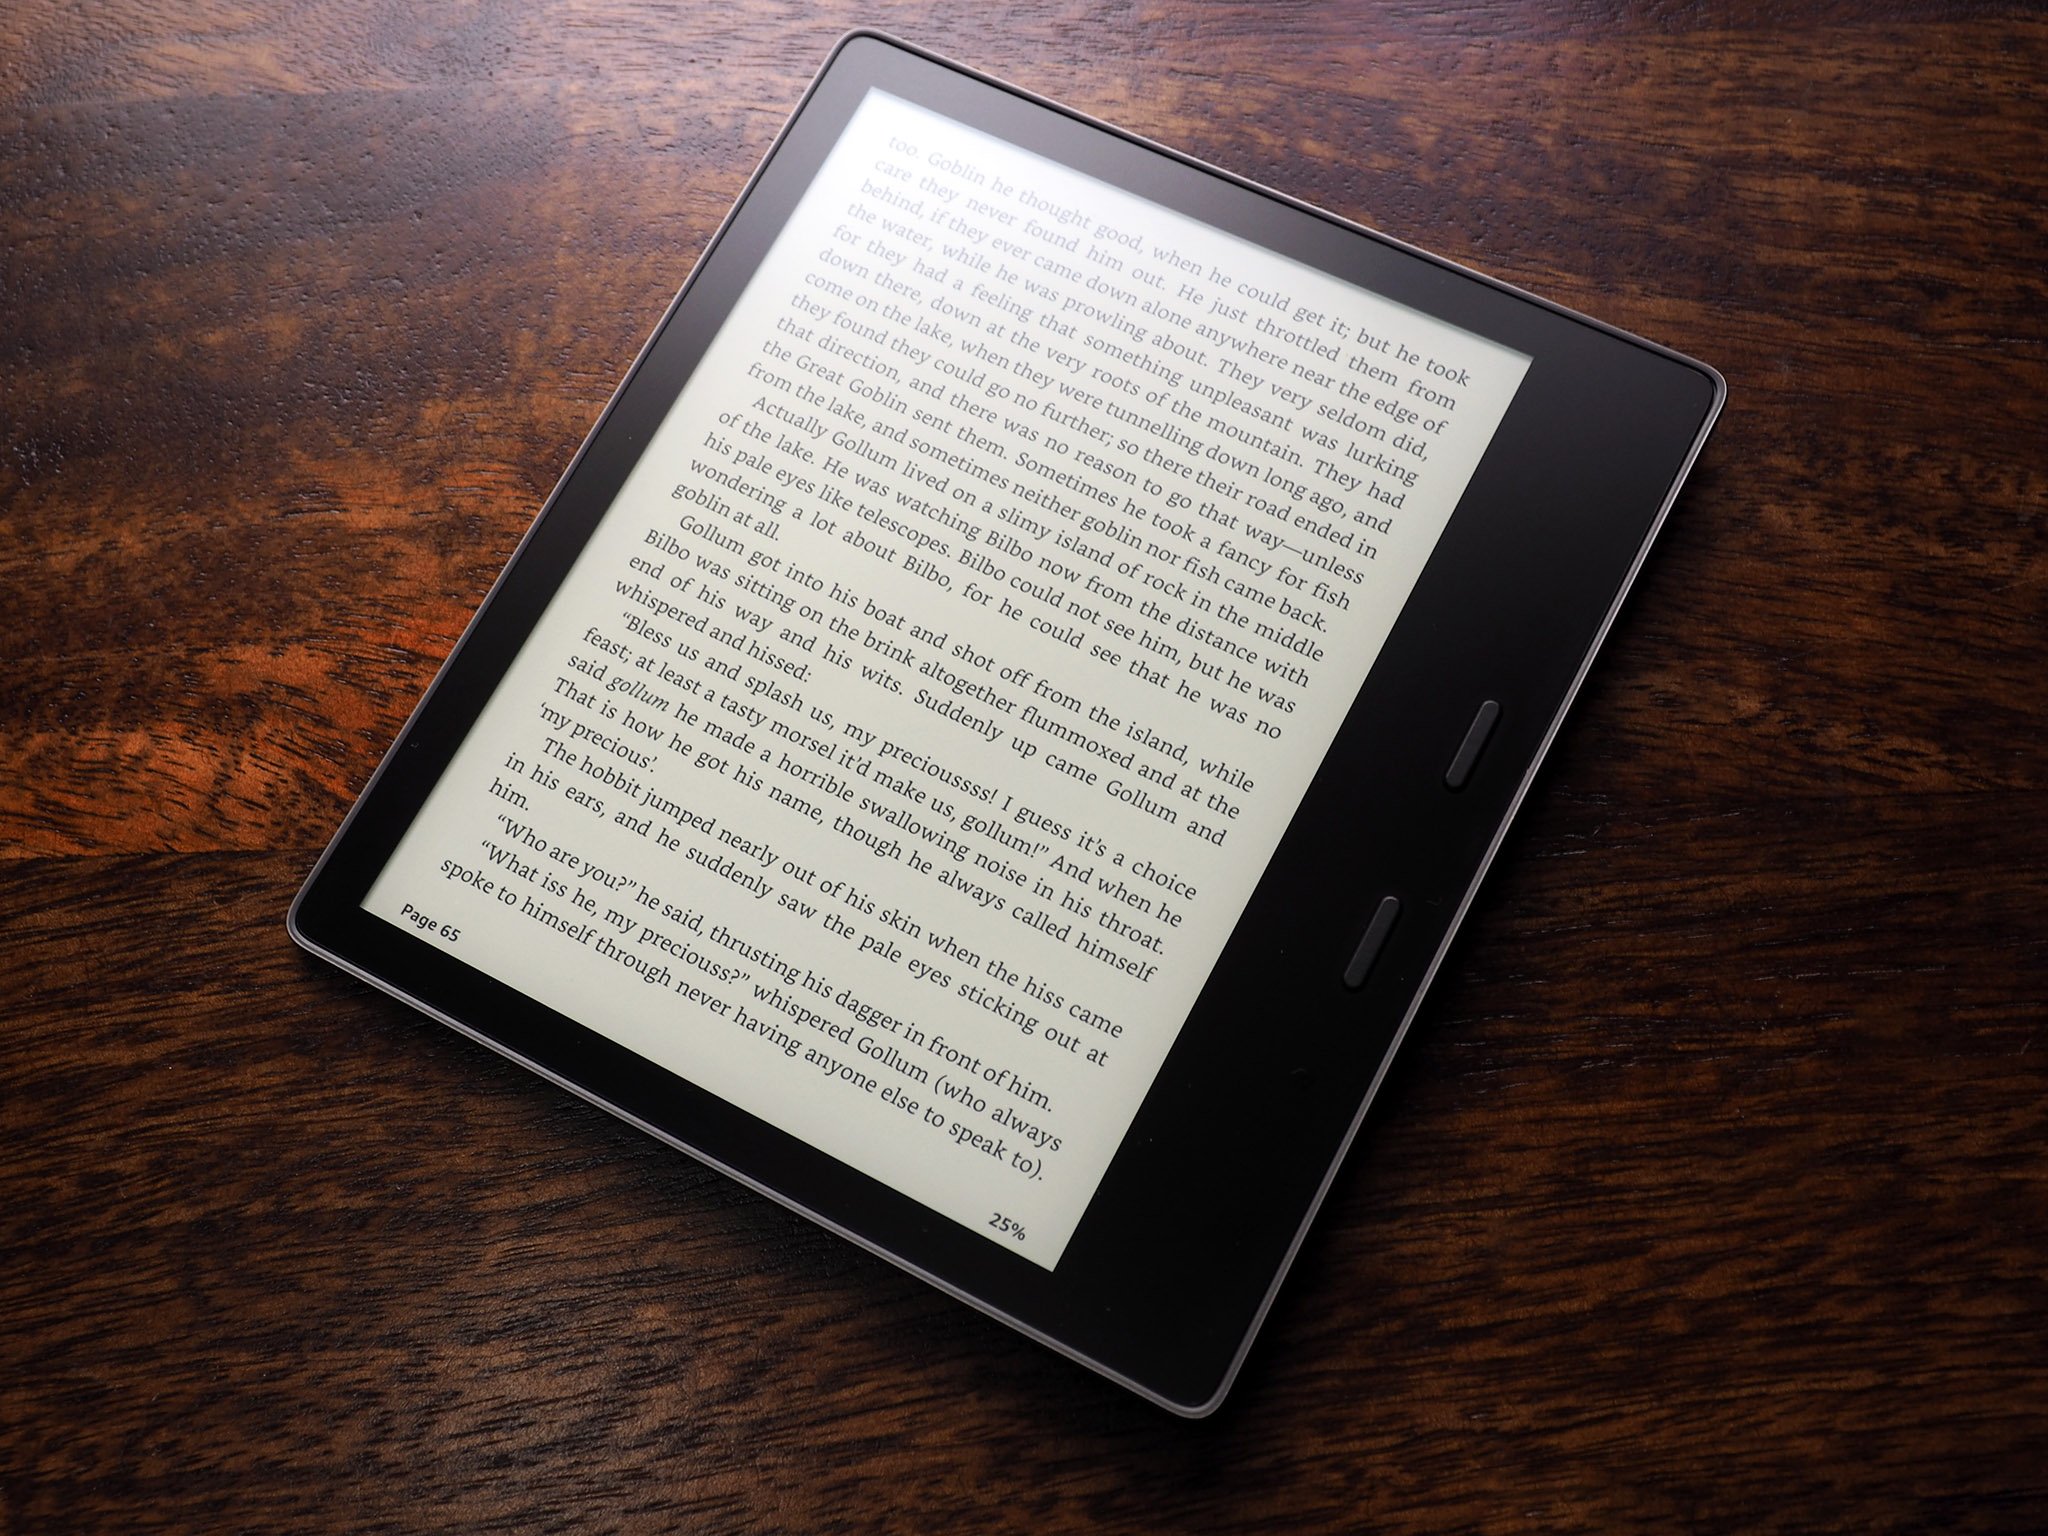 Amazon Kindle Oasis review: The best e-reader you can buy | Android Central